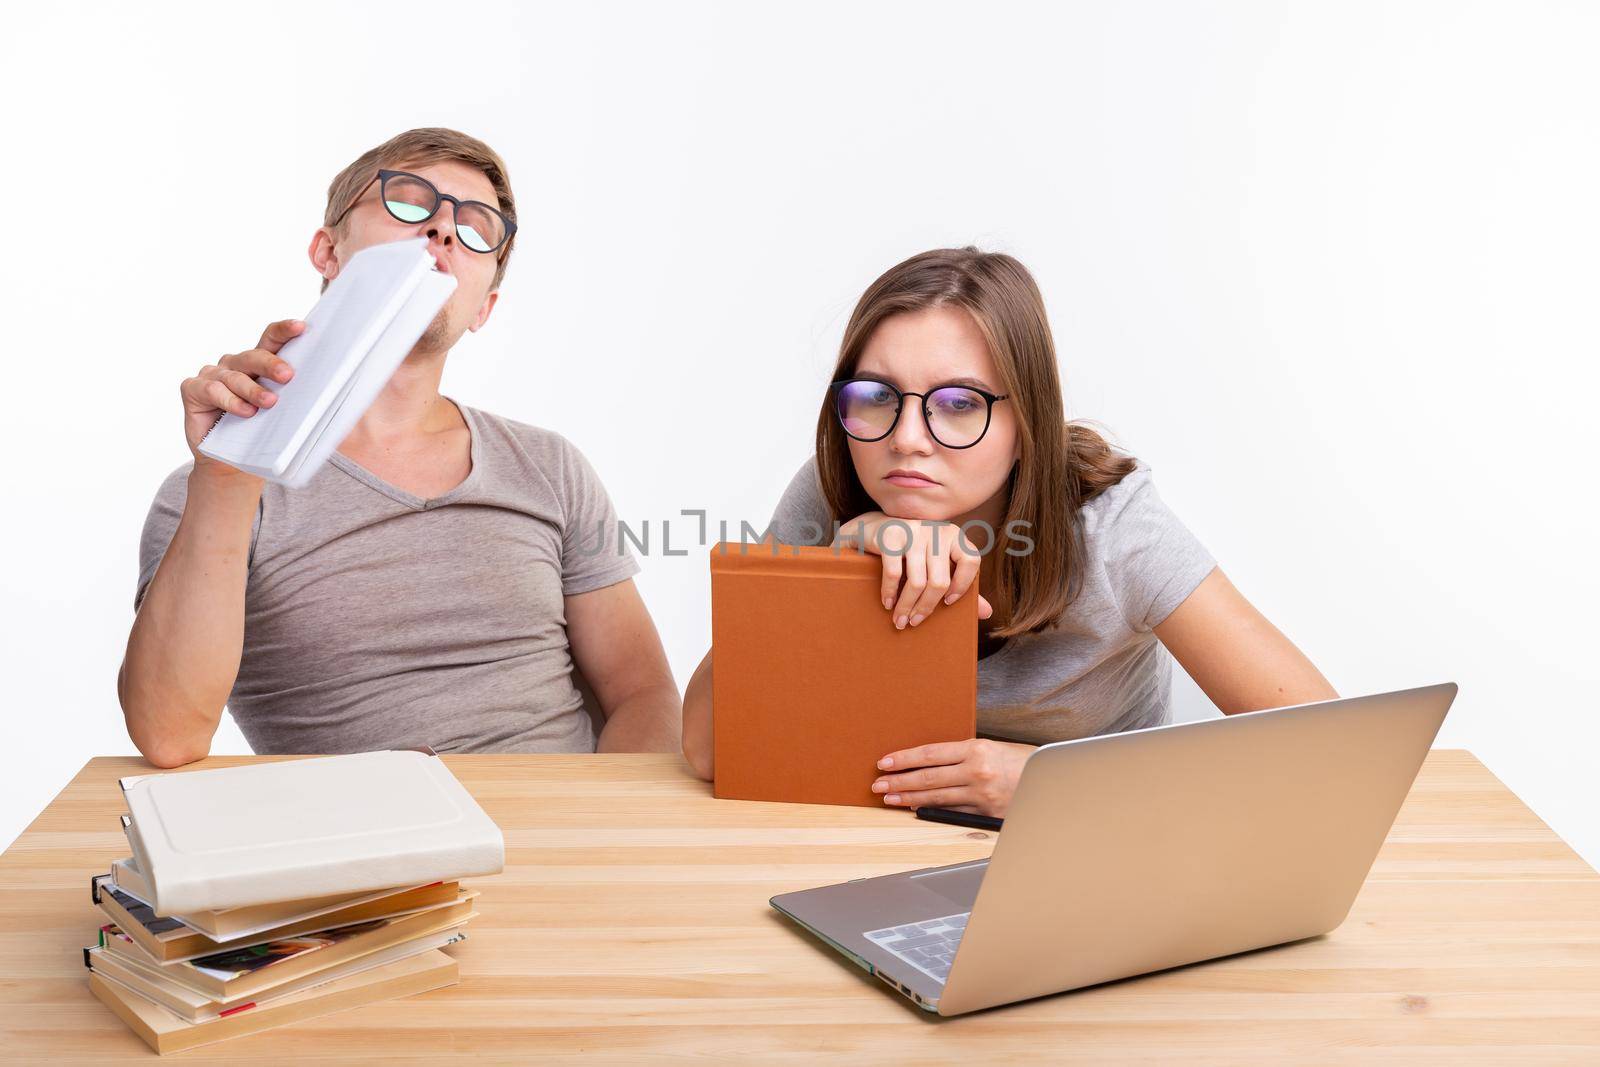 Education and people concept- a couple of young people in glasses look like they are bored of learning homework by Satura86